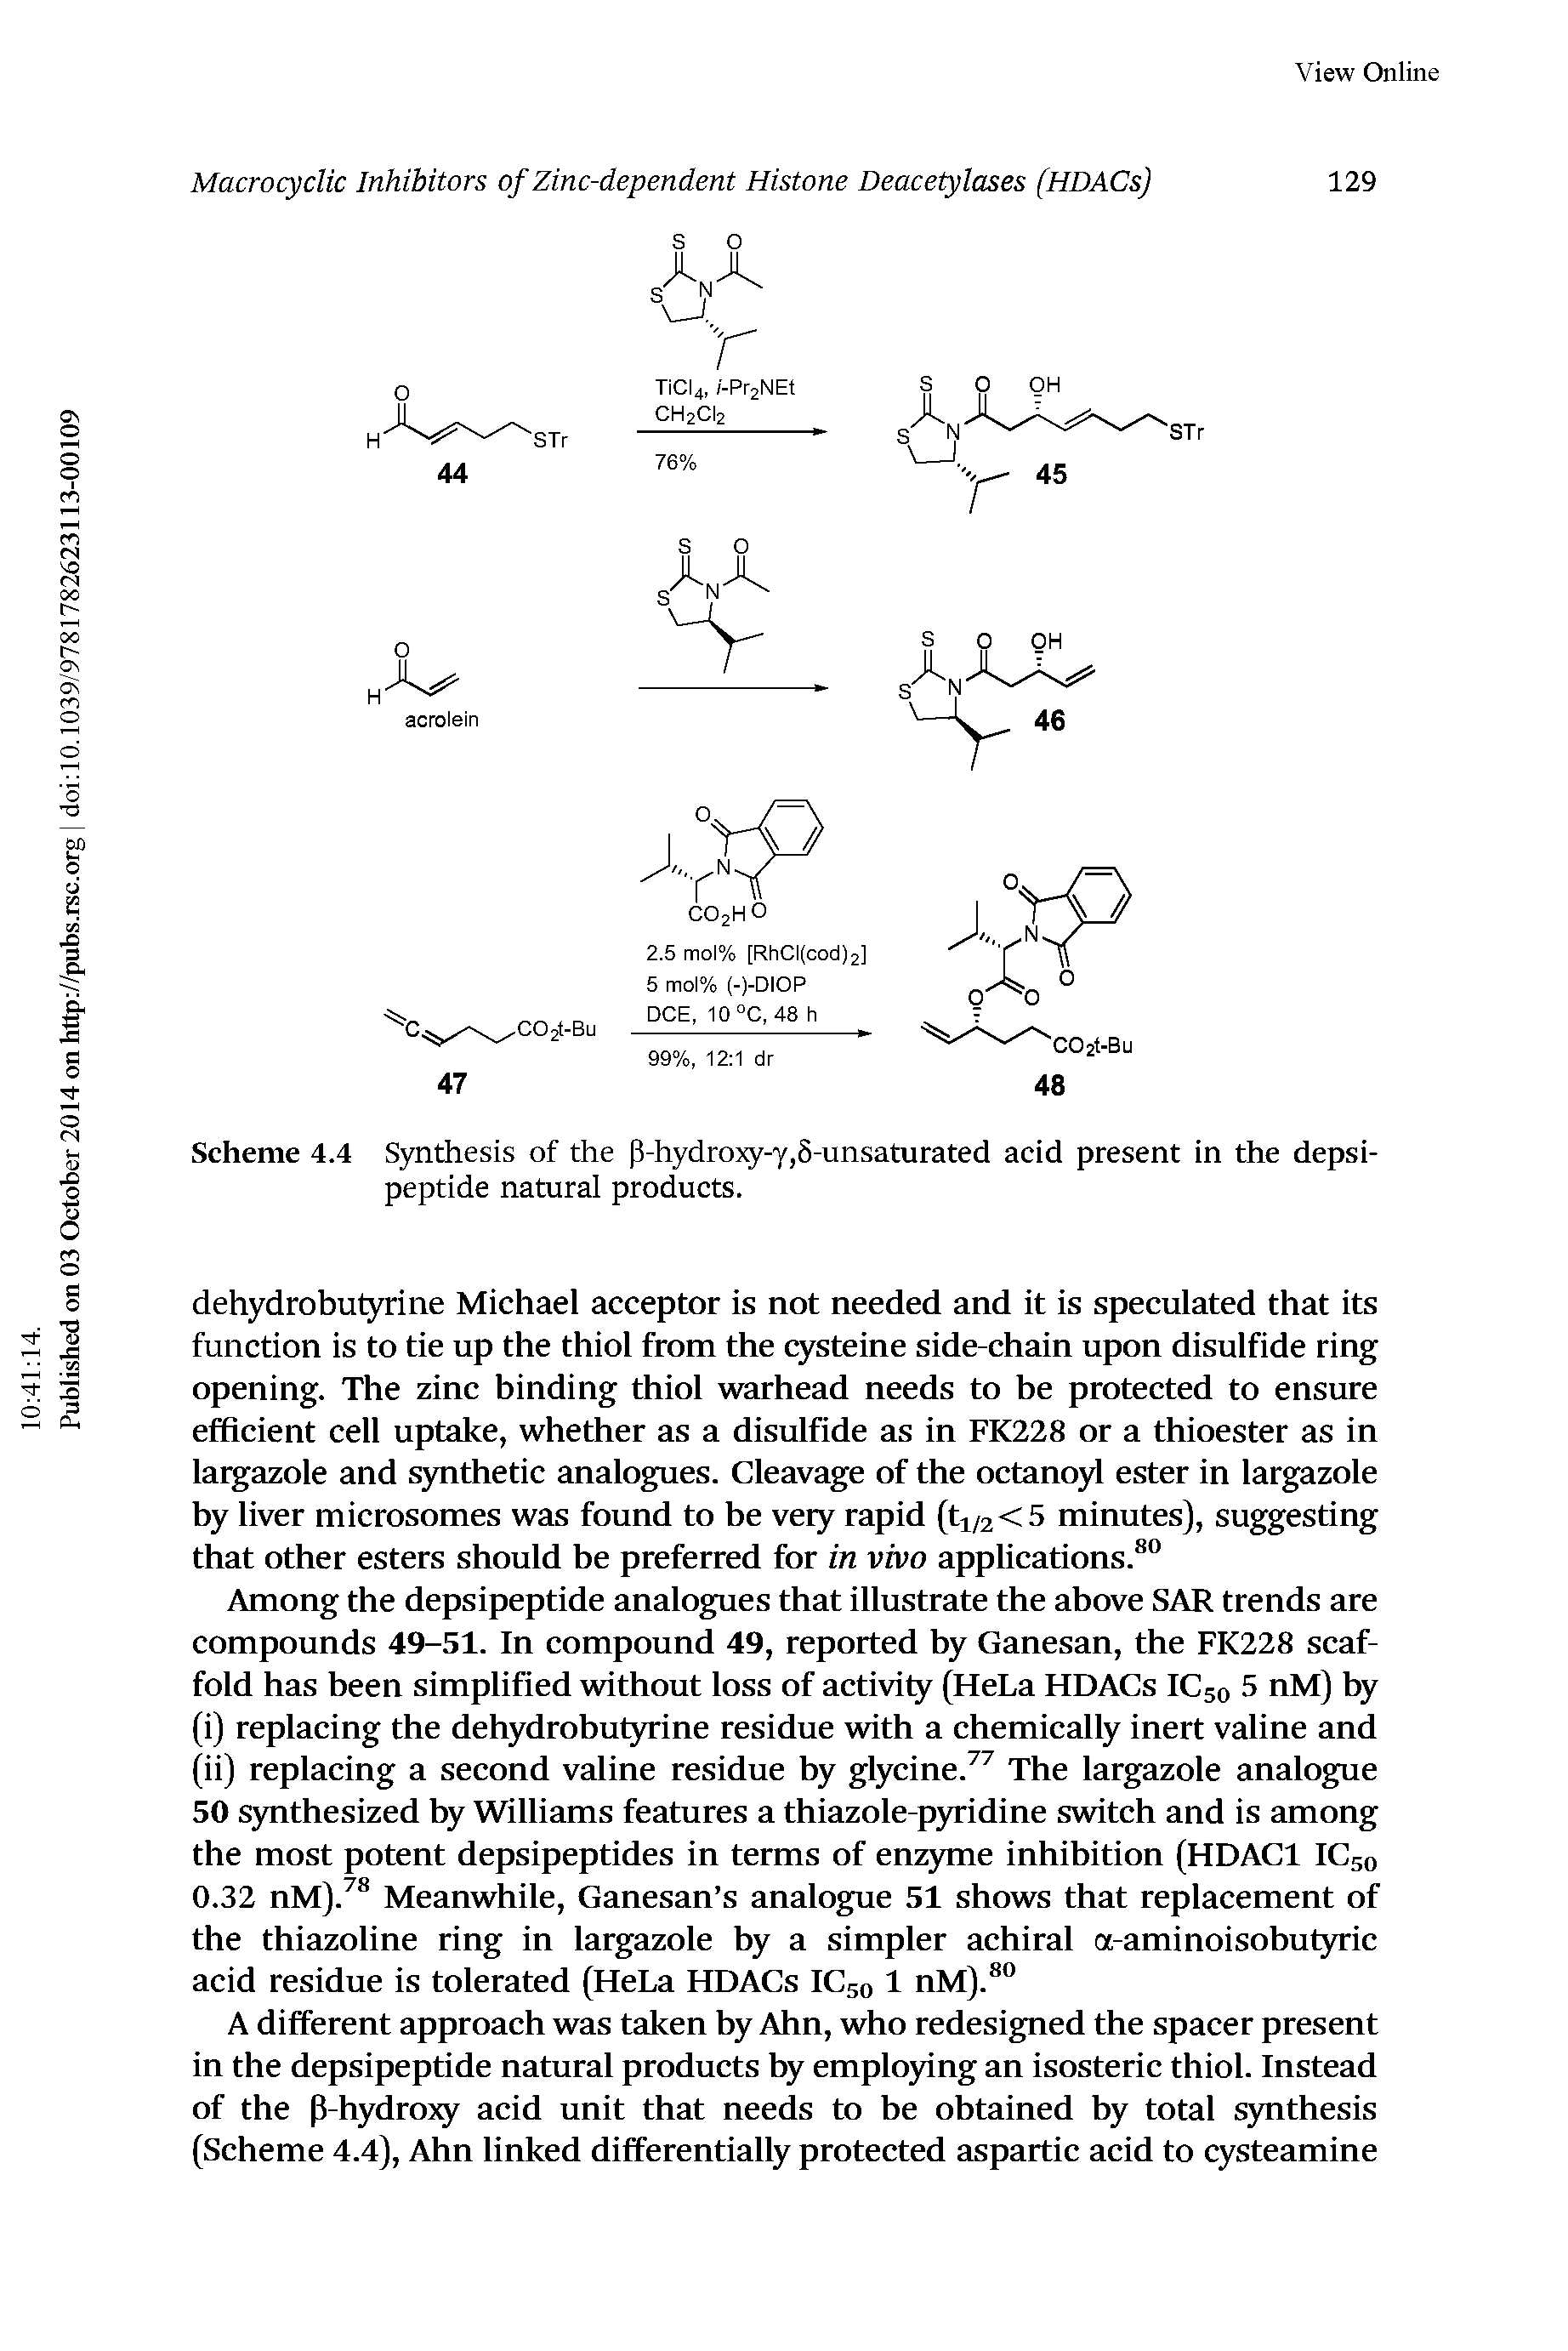 Scheme 4.4 Synthesis of the p-hydro5 -y,6-unsaturated acid present in the depsi-peptide natural products.